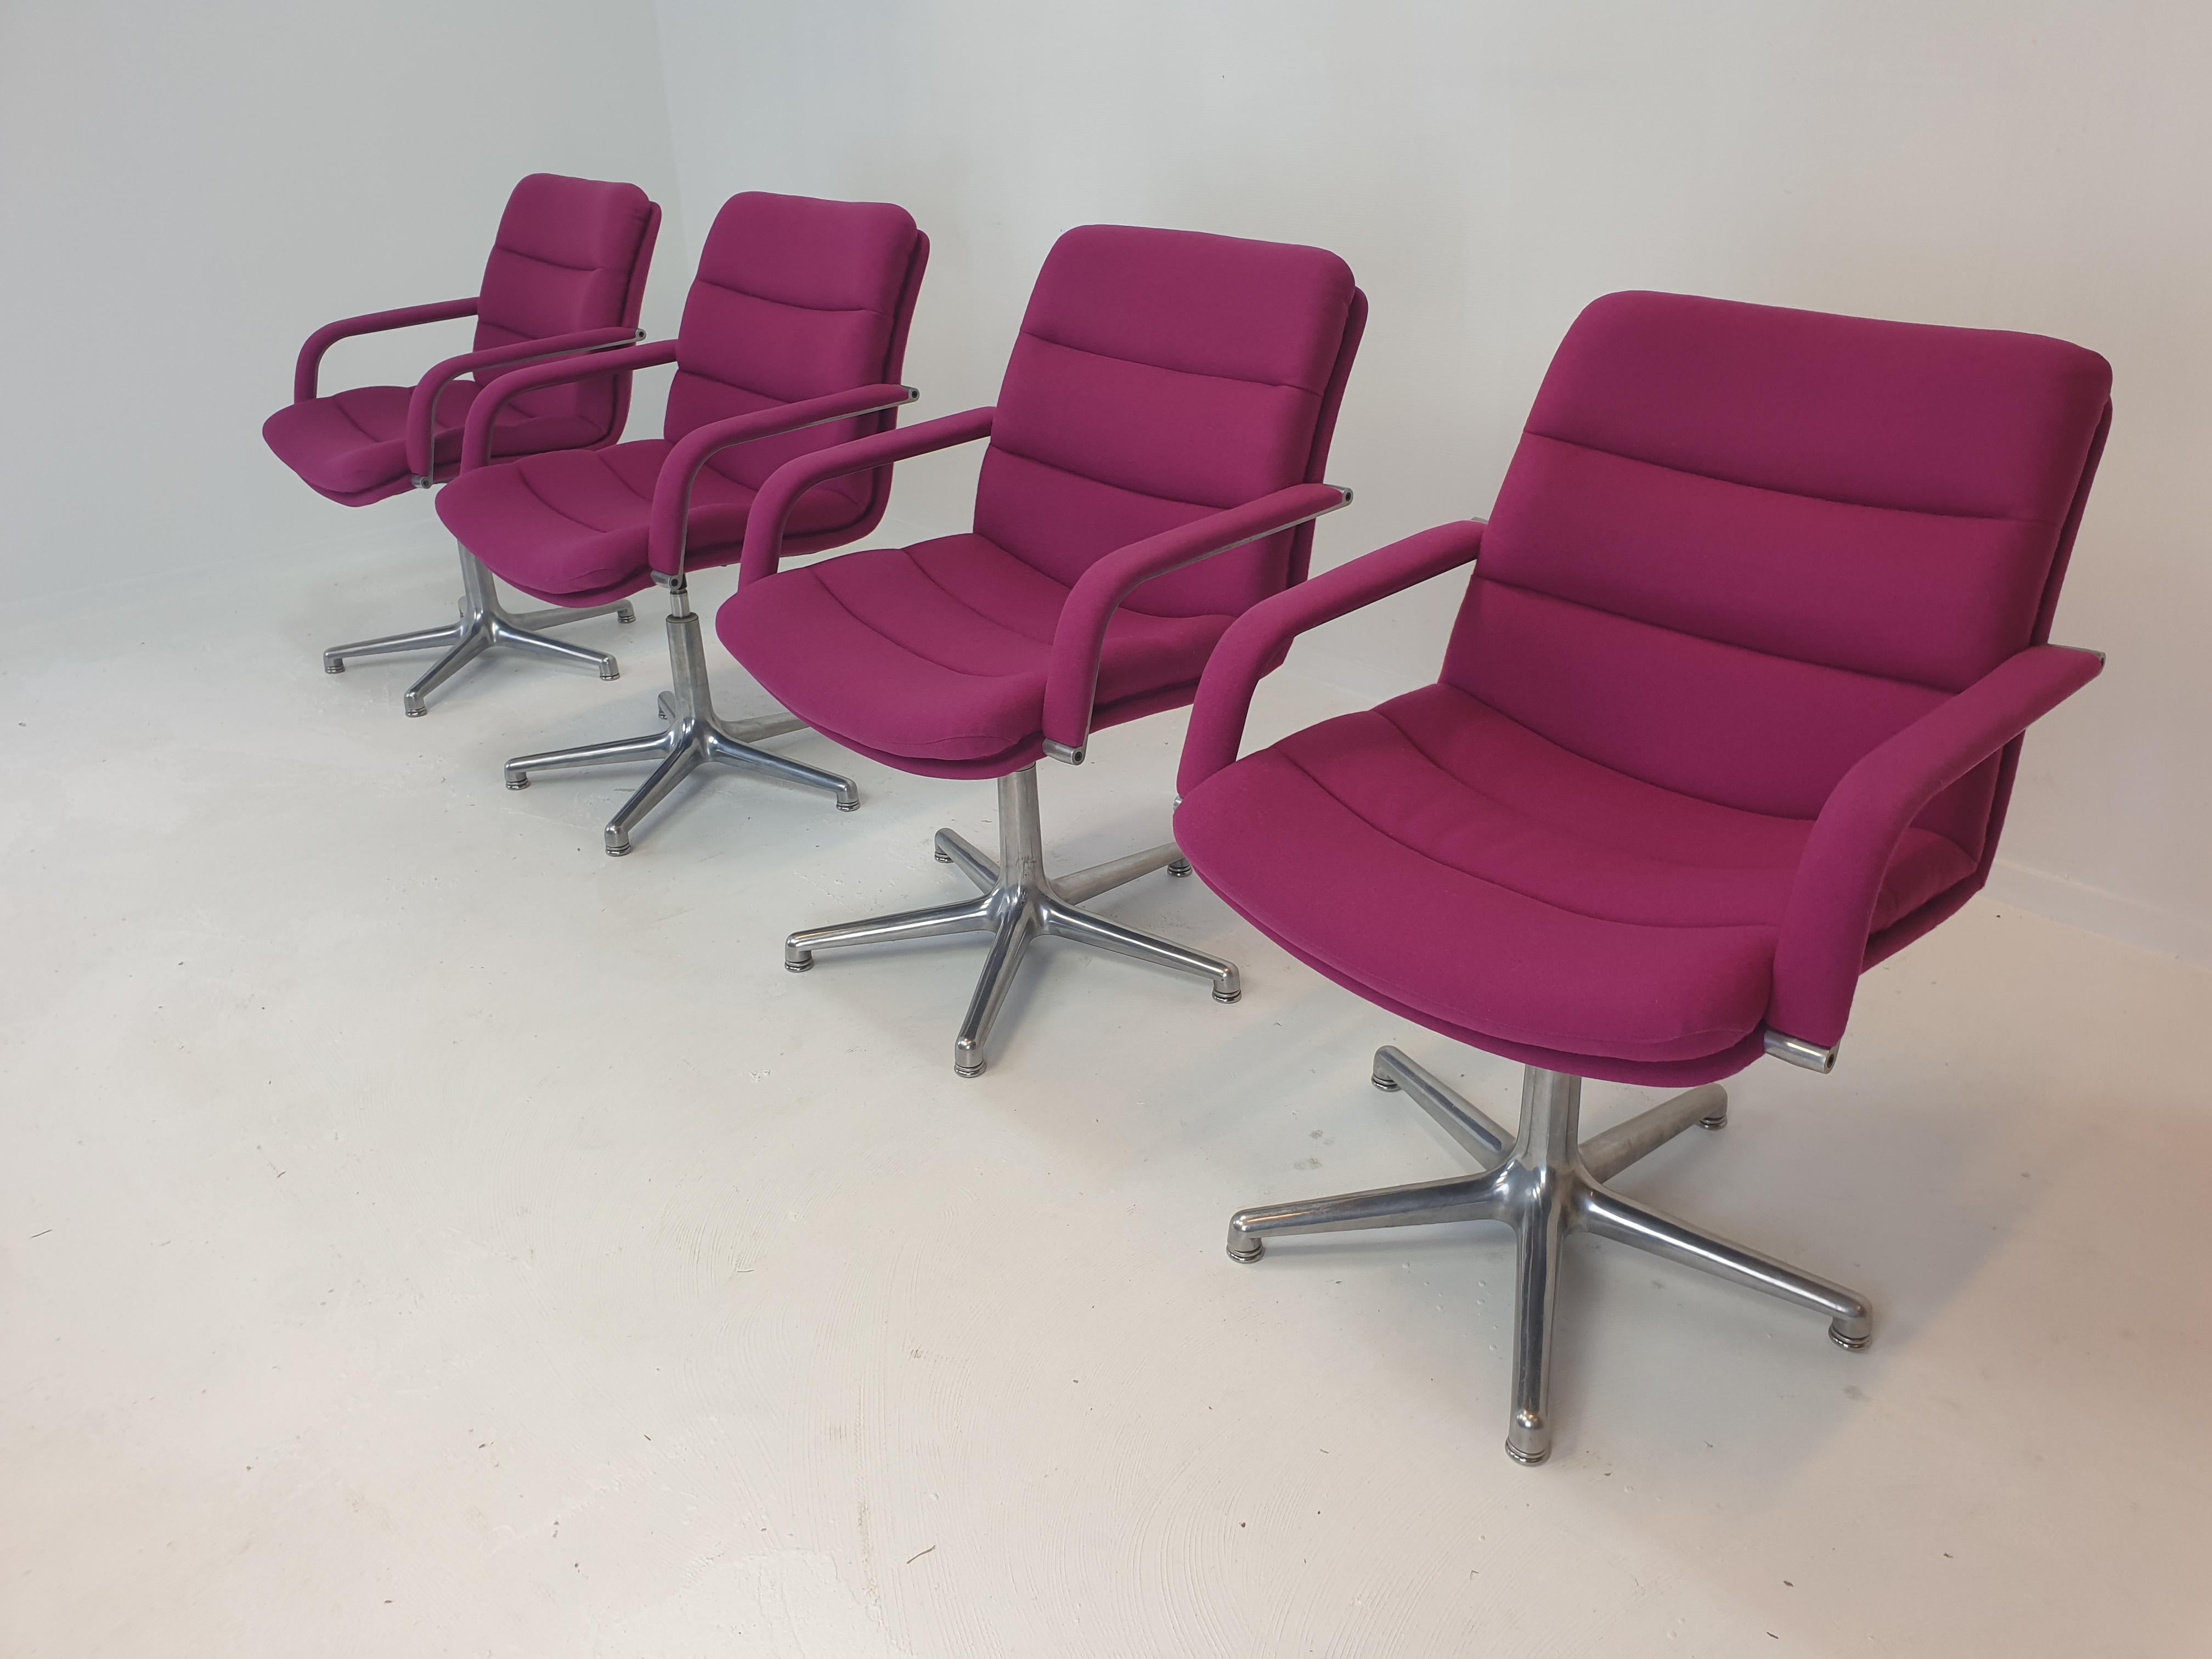 Very nice and comfortable desk or office chair designed by Geoffrey Harcourt for Artifort, The Netherlands, 1970s.

These swivel chairs are made with the best materials, they have a solid aluminum five-toe base. 
The high quality wool upholstery